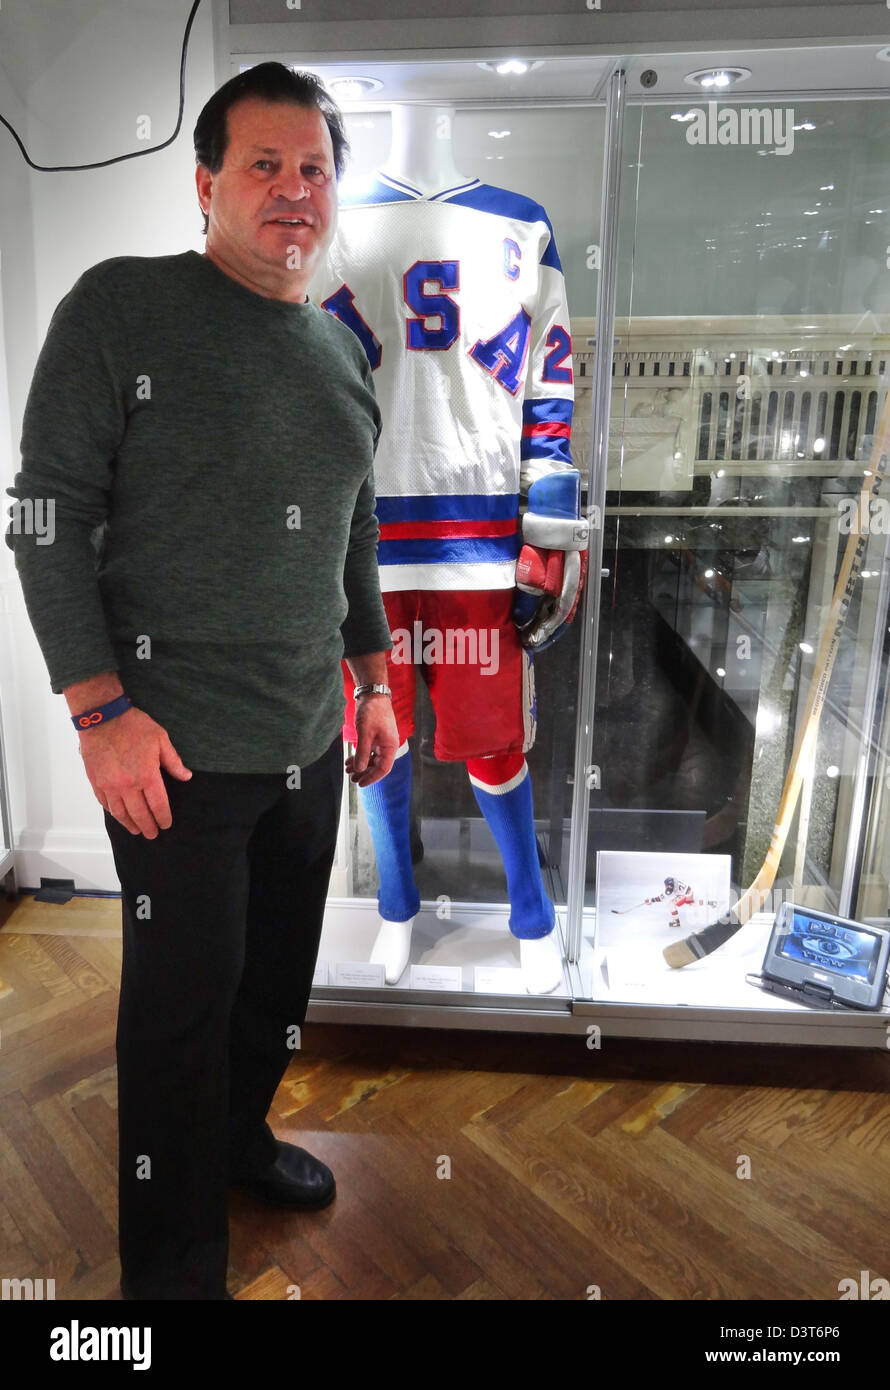 Former US Ice hockey player Mike Eruzione poses in front of his jersey (R) which was auctioned in New York, United States, 23 February 2013. Mike Eruzione wore the shirt during the 1980 Winter Olympics when he was captain of the US ice hockey national team. The United States team, made up of amateur and collegiate players, defeated the Soviet team, who had won nearly every world championship and Olympic tournament since 1954. The 'Miracle on Ice' is one of the Top Sports Moment of the 20th Century. The jersey was sold for 657,250 dollars (498,000 euros). Photo: Nezih Payzin Stock Photo